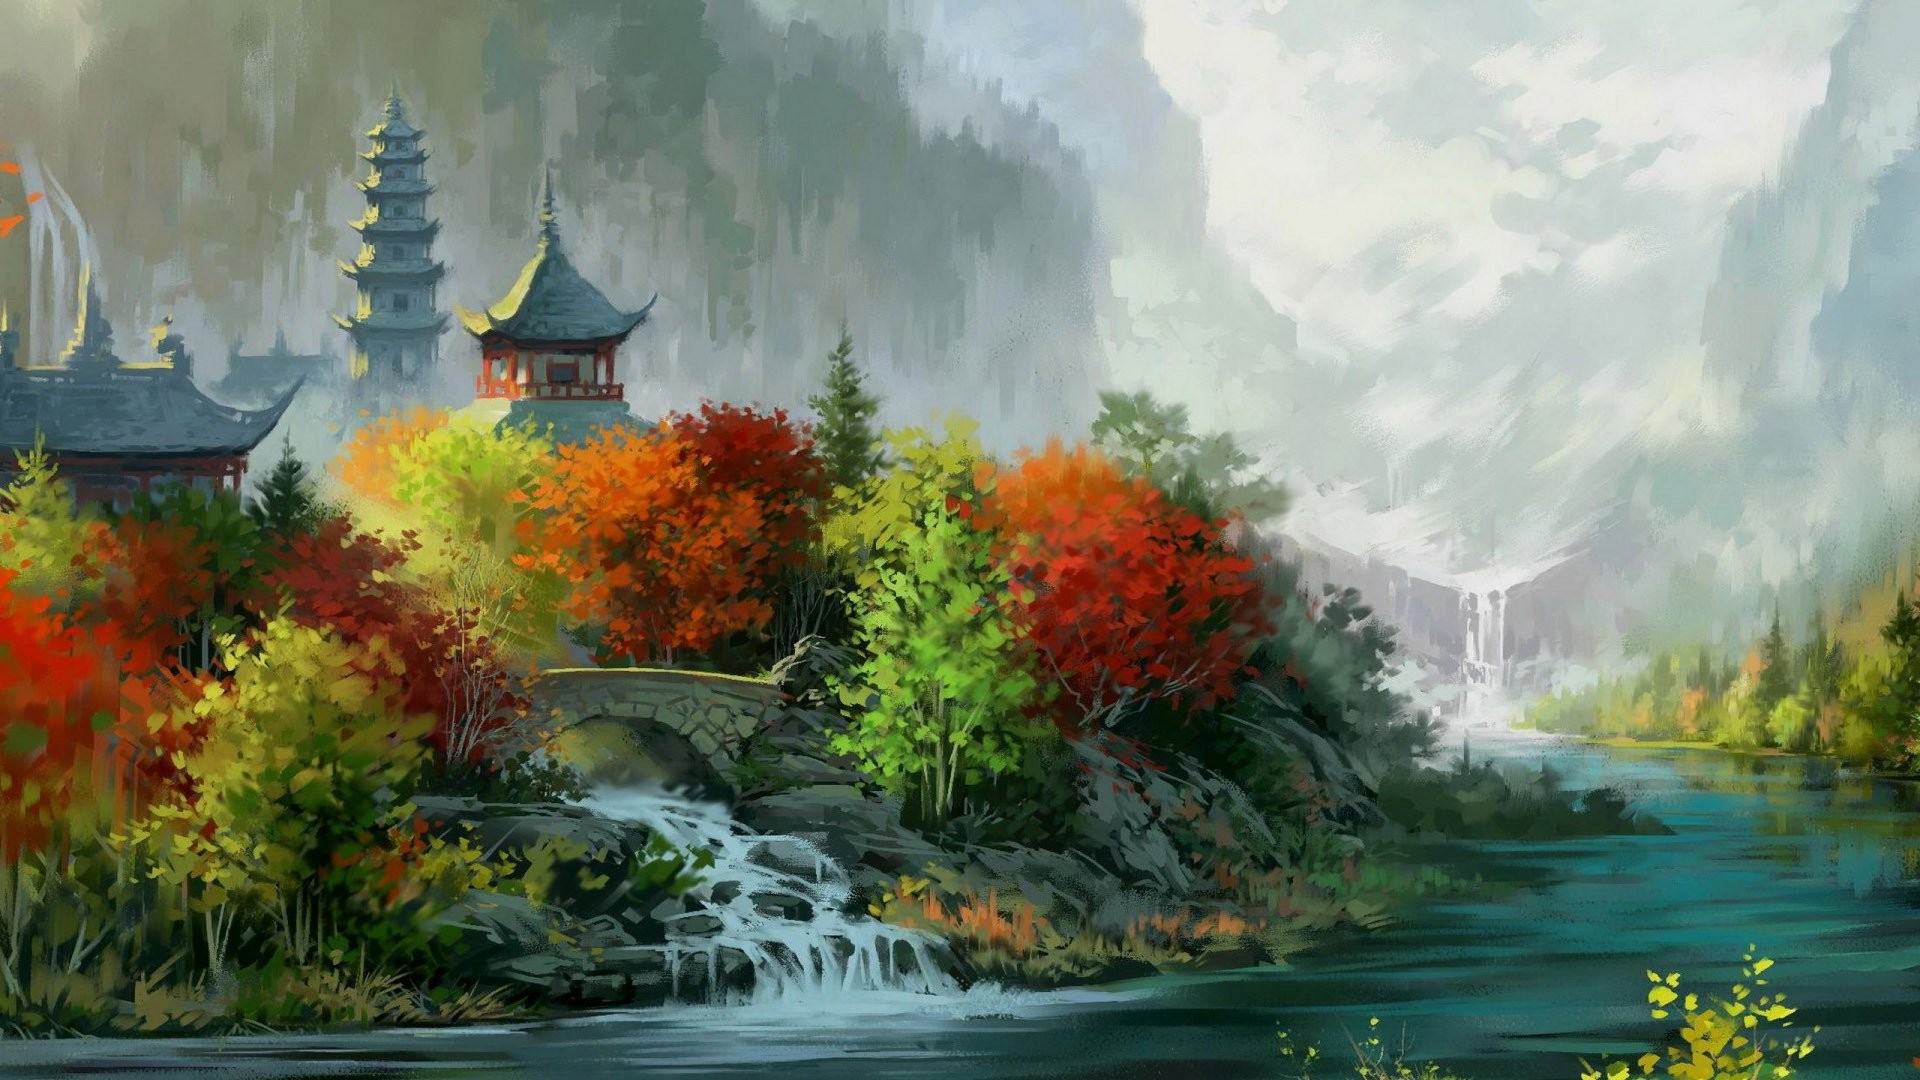 Artwork Painting Digital Art Asian Architecture House Tower